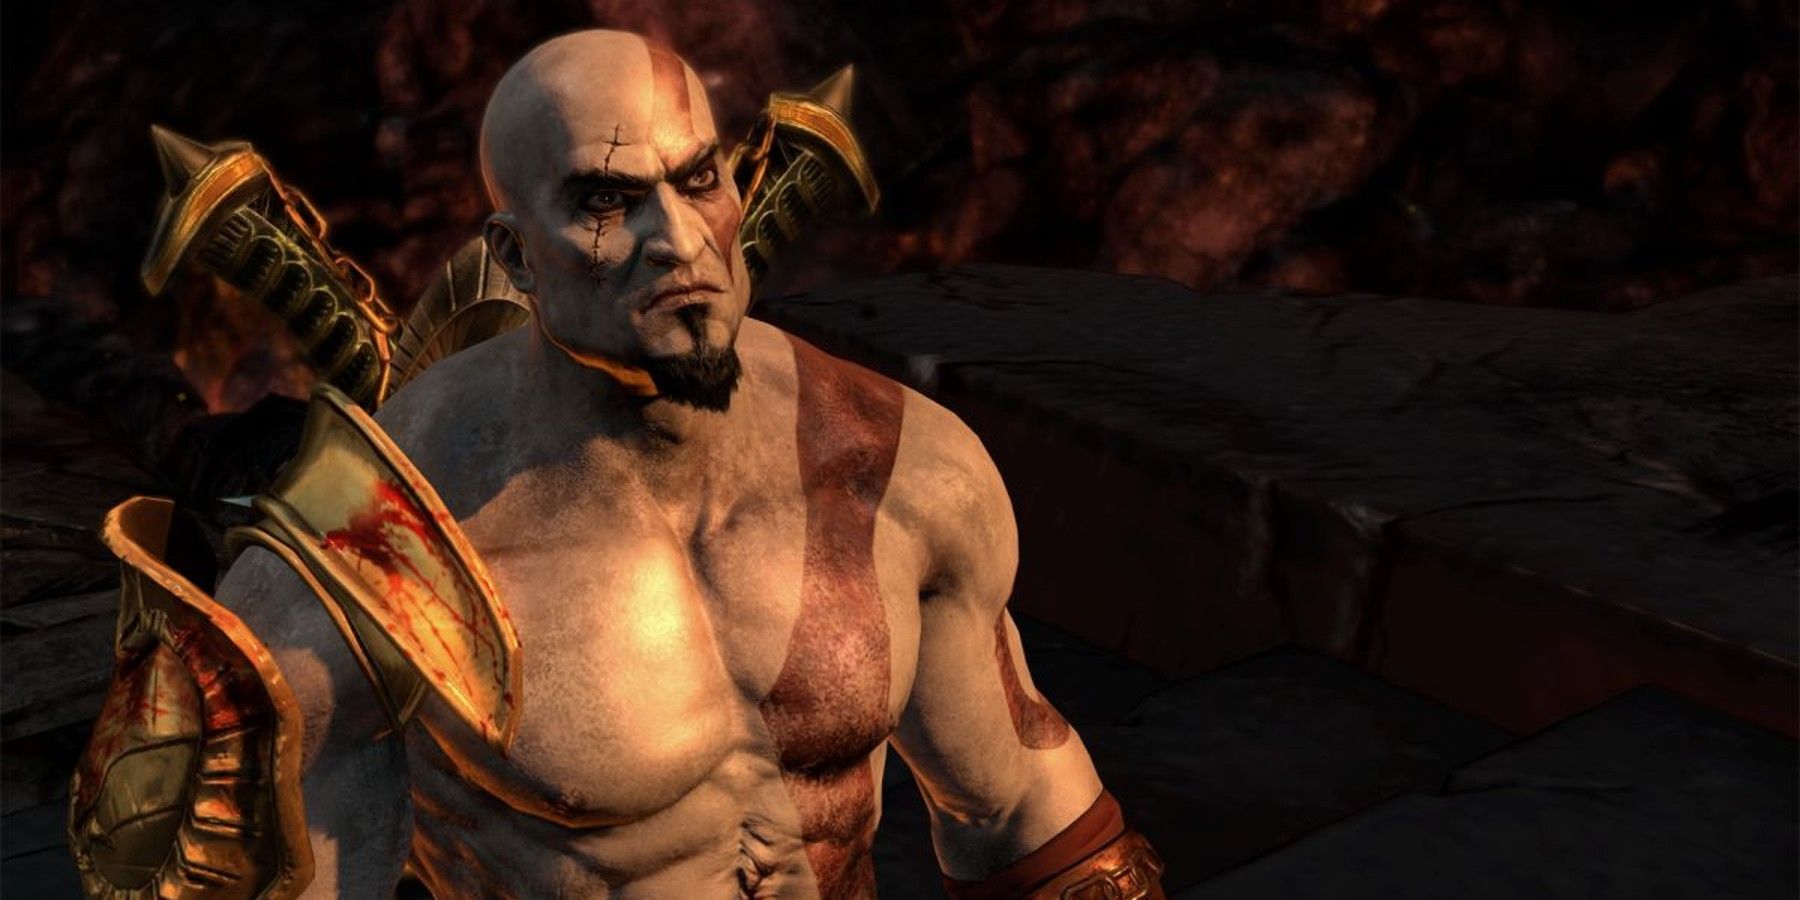 God of War Fans Discuss Inconsistency With Ares Compared to the Other Greek Gods